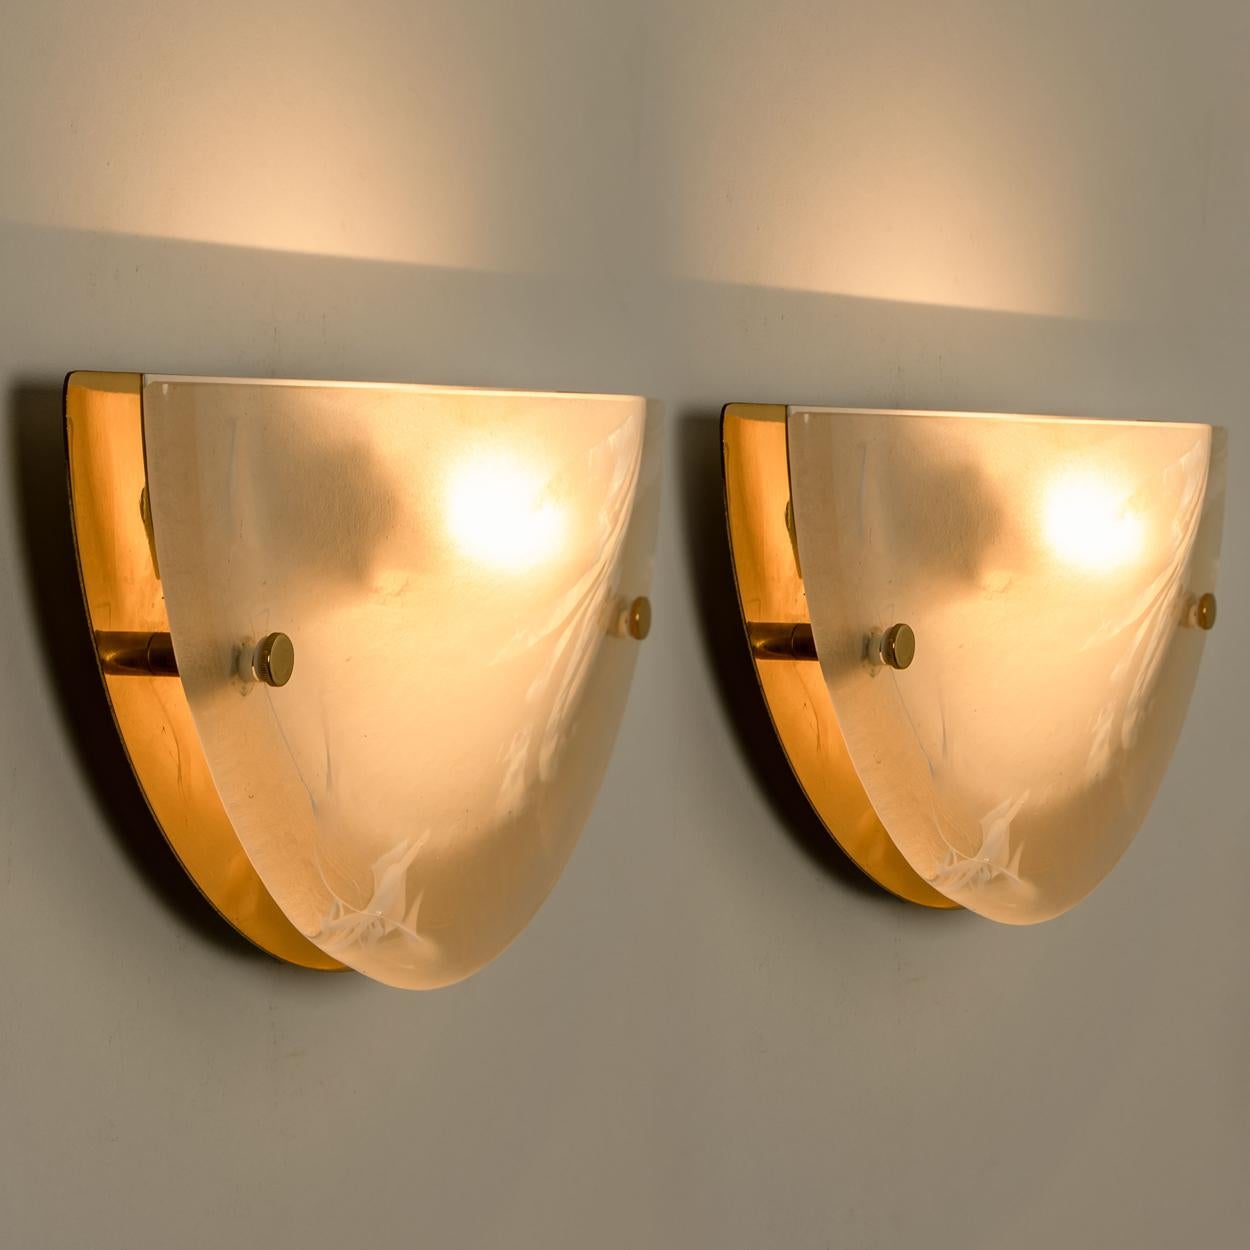 One of the Four Pairs of Murano Brass and Glass Wall Lights, Hillebrand, 1969 For Sale 2